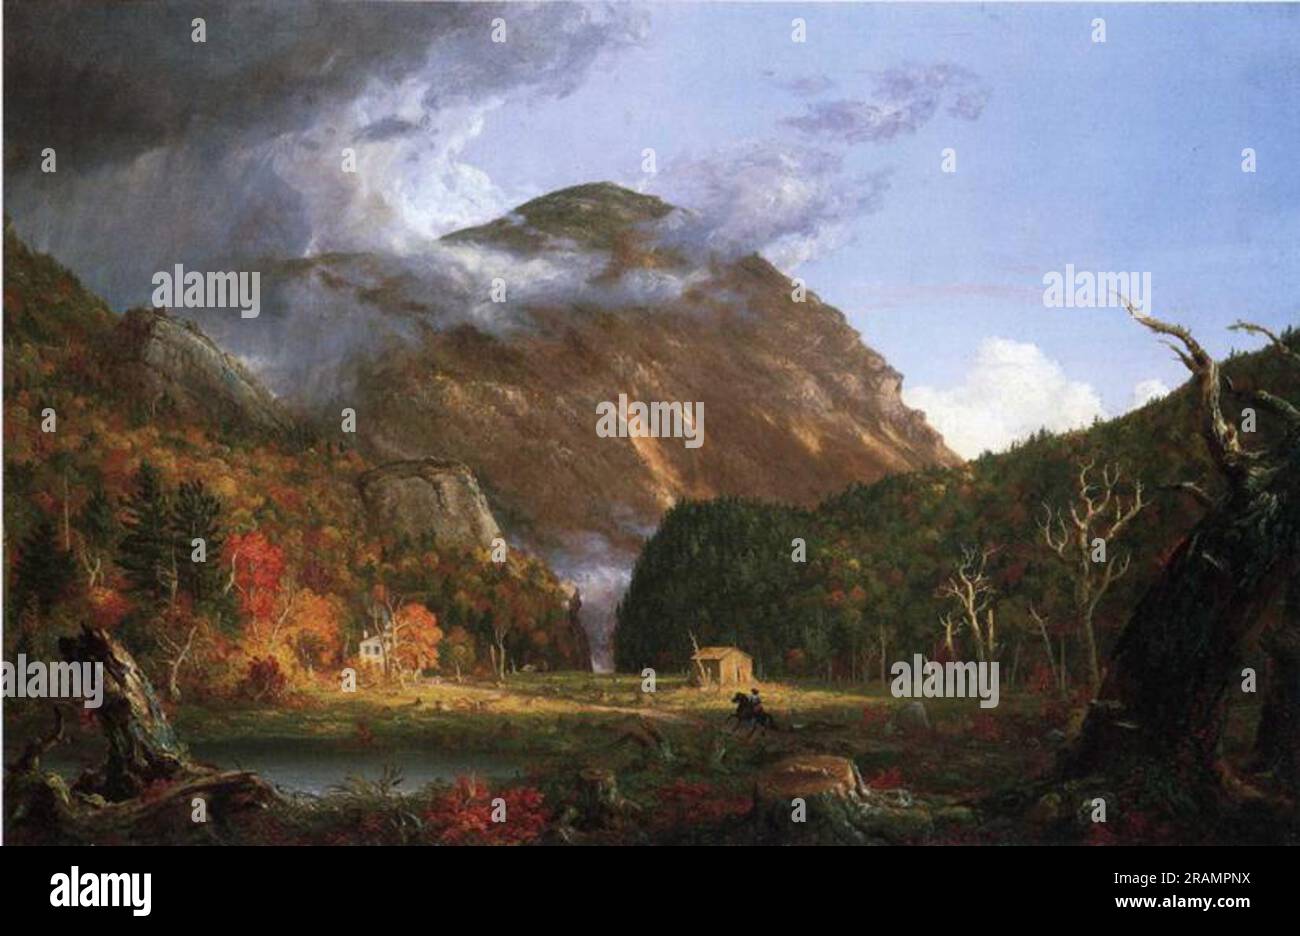 The Notch of the White Mountains (Crawford Notch) 1839 by Thomas Cole Stock Photo